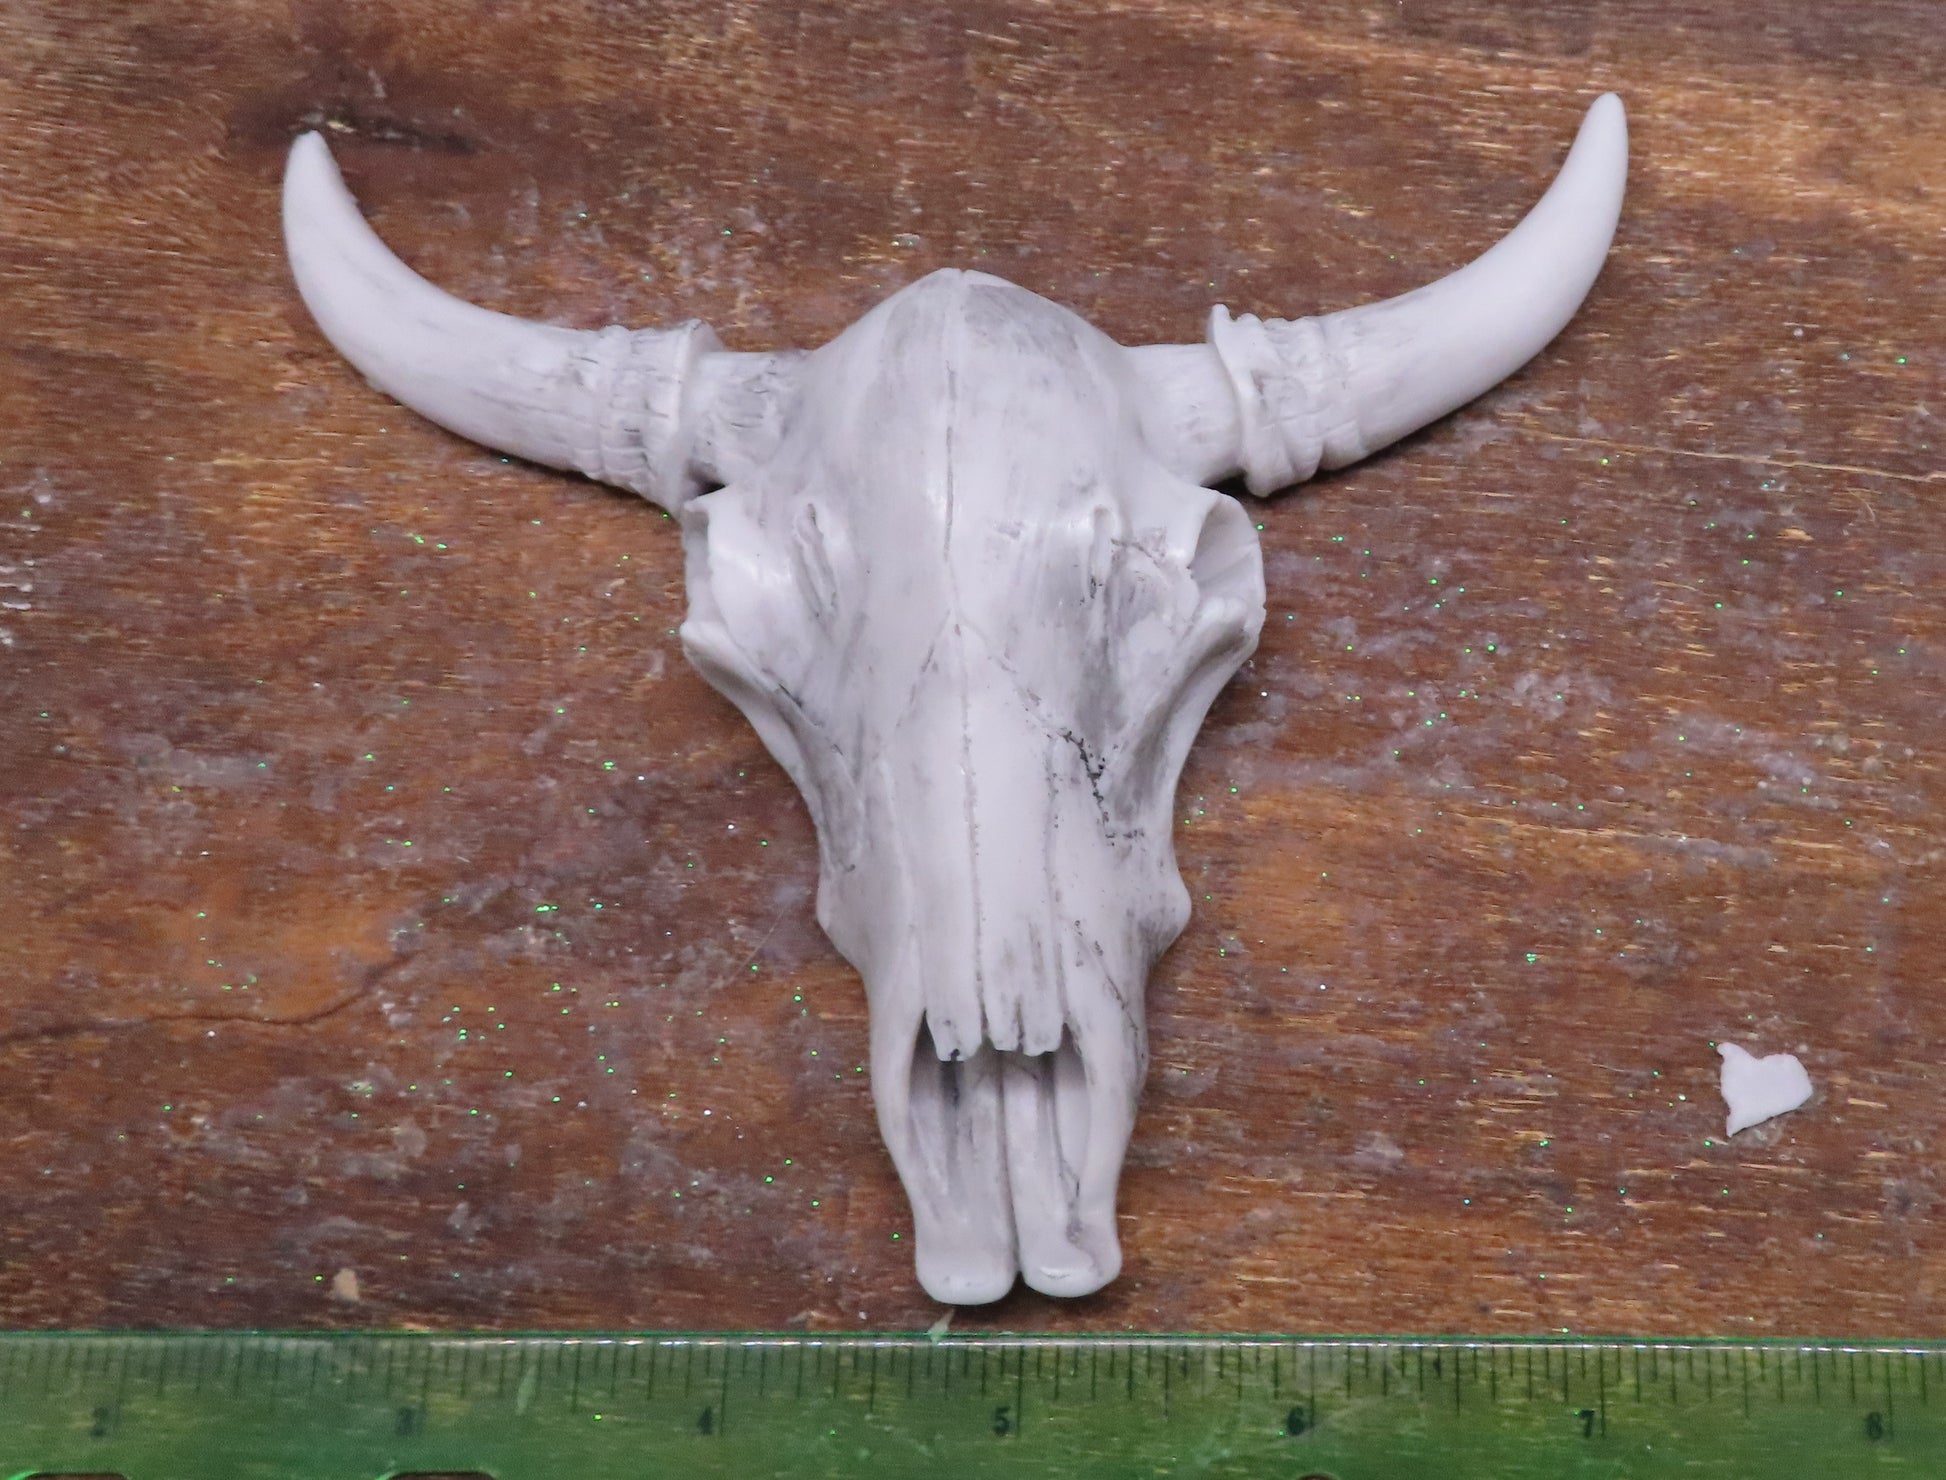 Steer skull goat milk soap approximately 4.5 inches x 4 inches.  